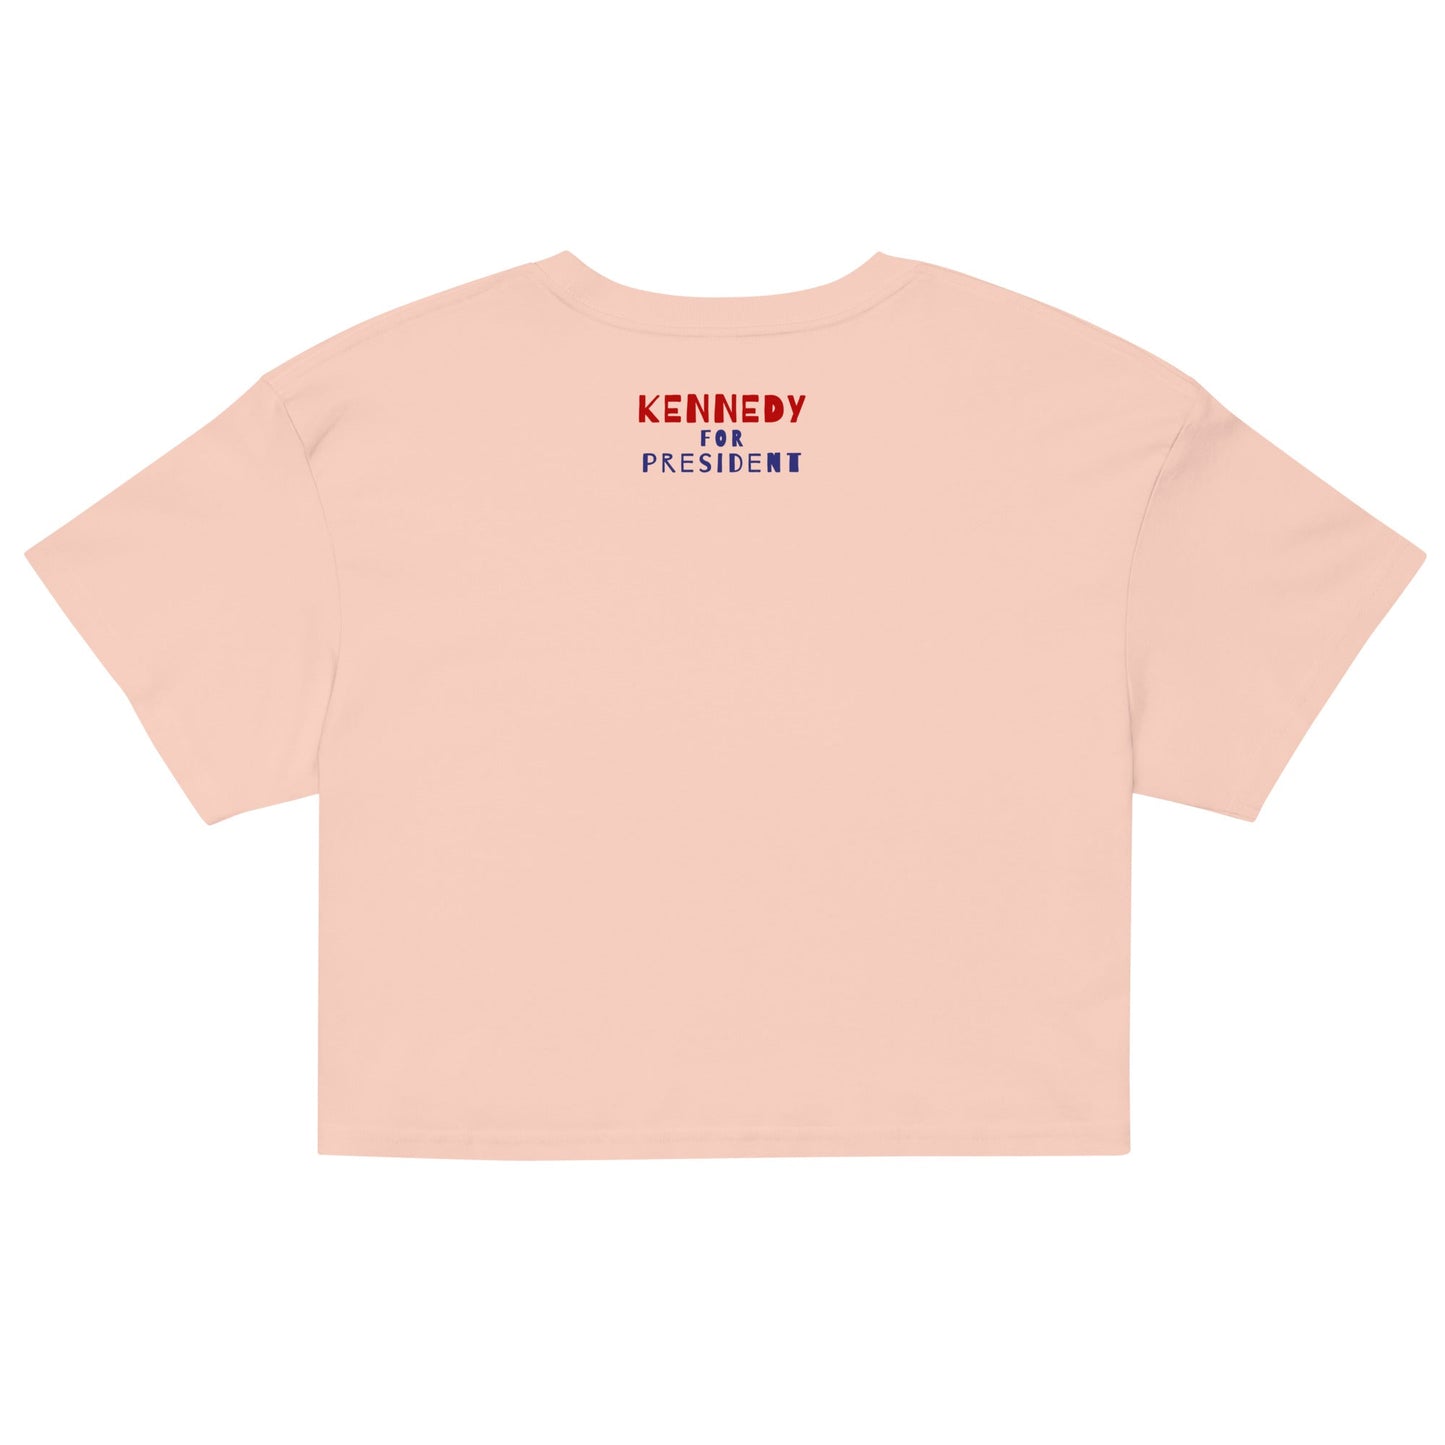 Gen - Z for Kennedy Women’s Crop Top - TEAM KENNEDY. All rights reserved